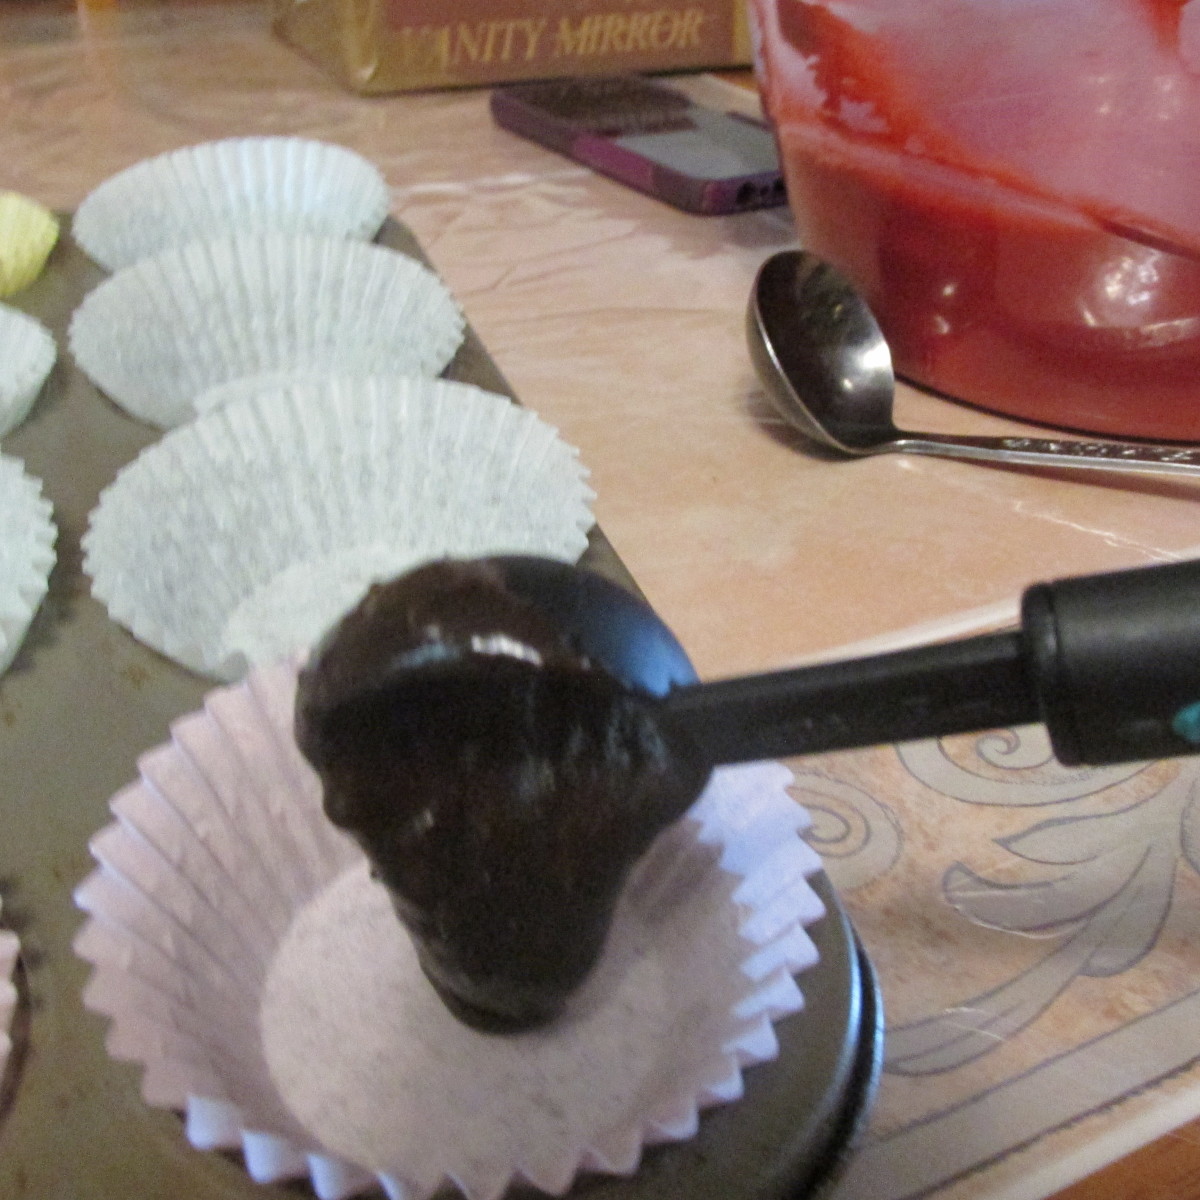 Drop the brownie batter into the bottom of each cupcake liner.